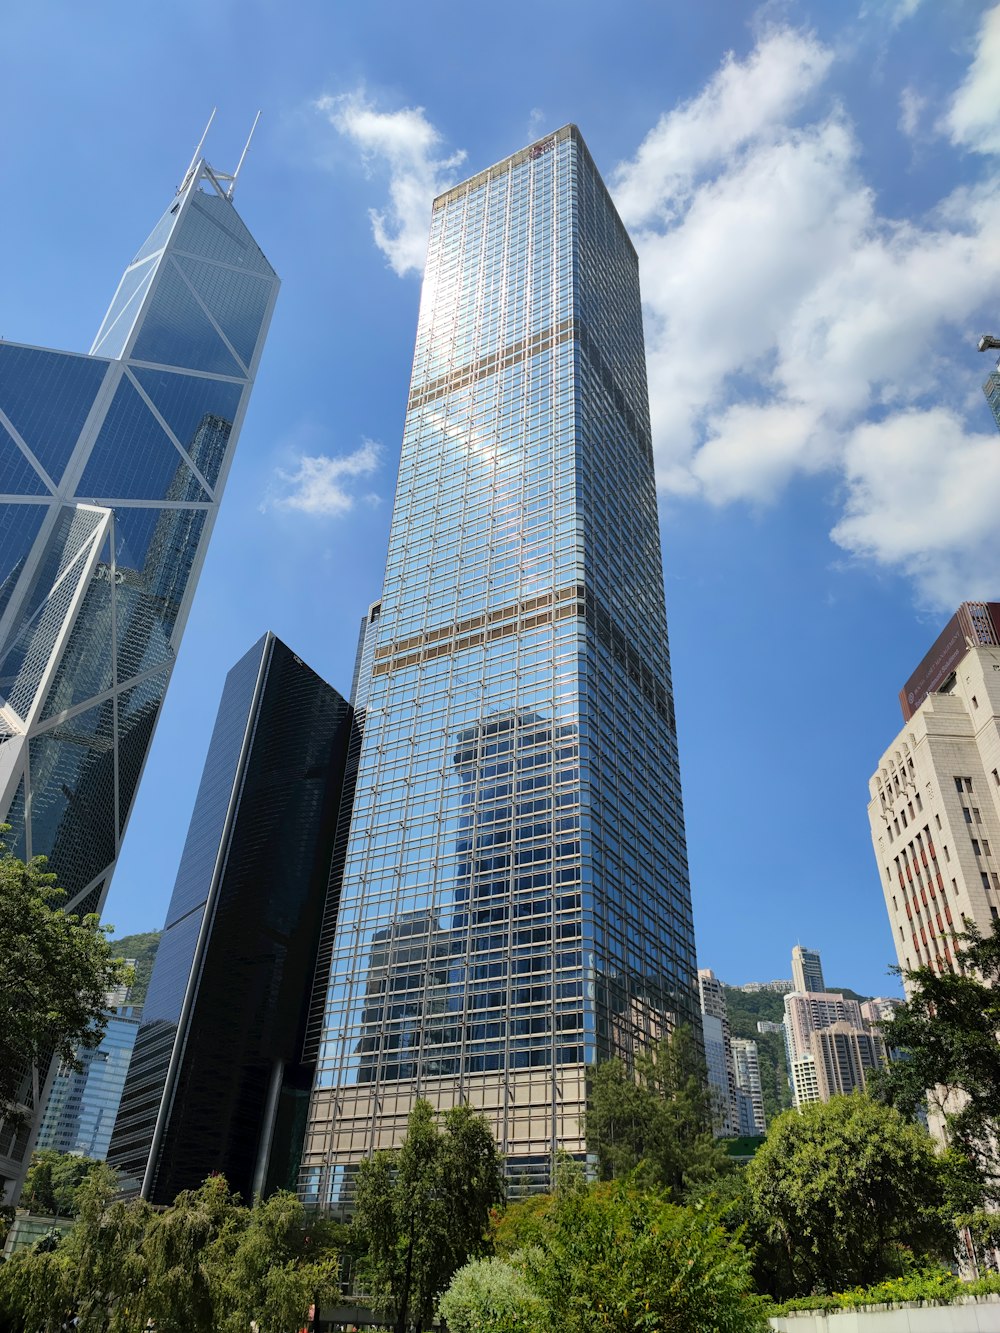 a very tall building surrounded by other tall buildings